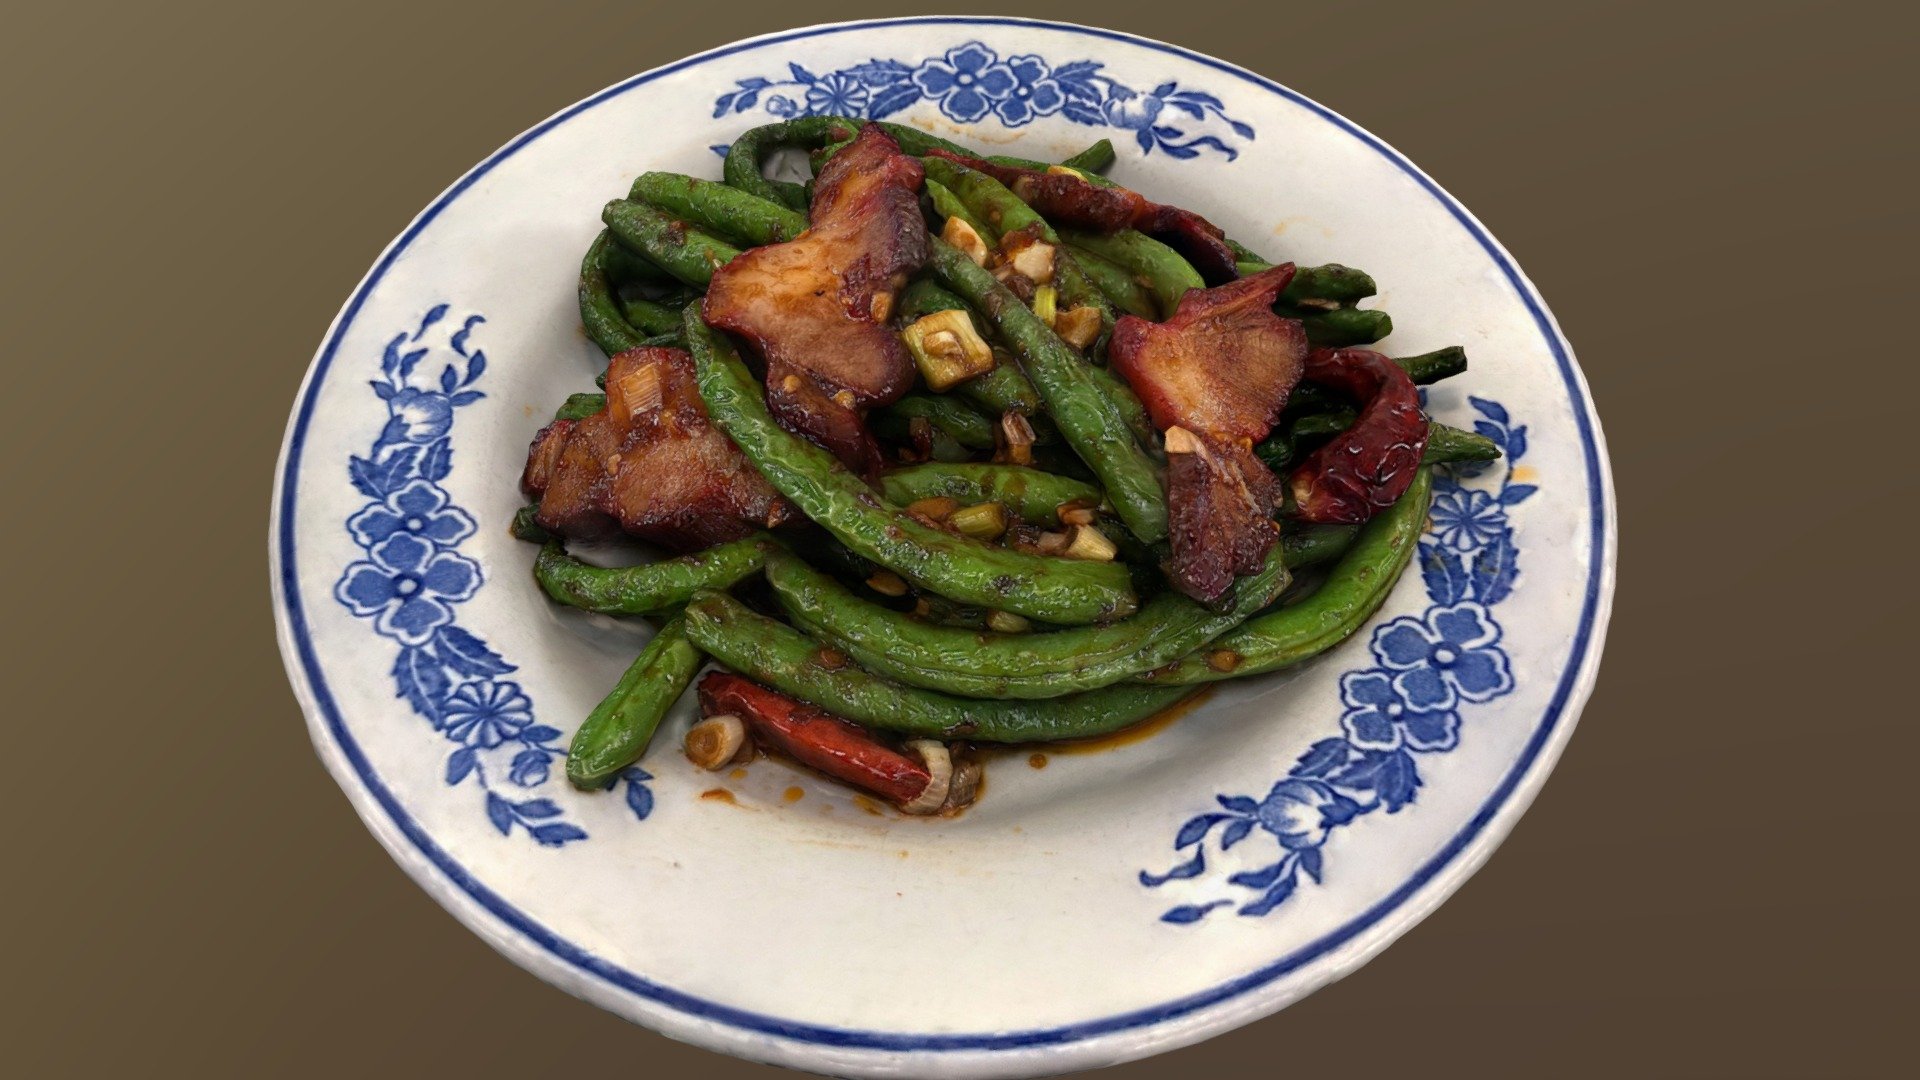 A simple and delicious dish made with fresh green beans, stir-fried with slices of BBQ pork in a savory sauce.

Emma’s Boldly Redefined Asian Cuisine Driven by modern culinary technique and Northern California influence

817 Francisco Blvd W, San Rafael, CA 94901 - Emma's String Beans BBQ Pork - 3D model by Augmented Reality Marketing Solutions LLC (@AugRealMarketing) 3d model